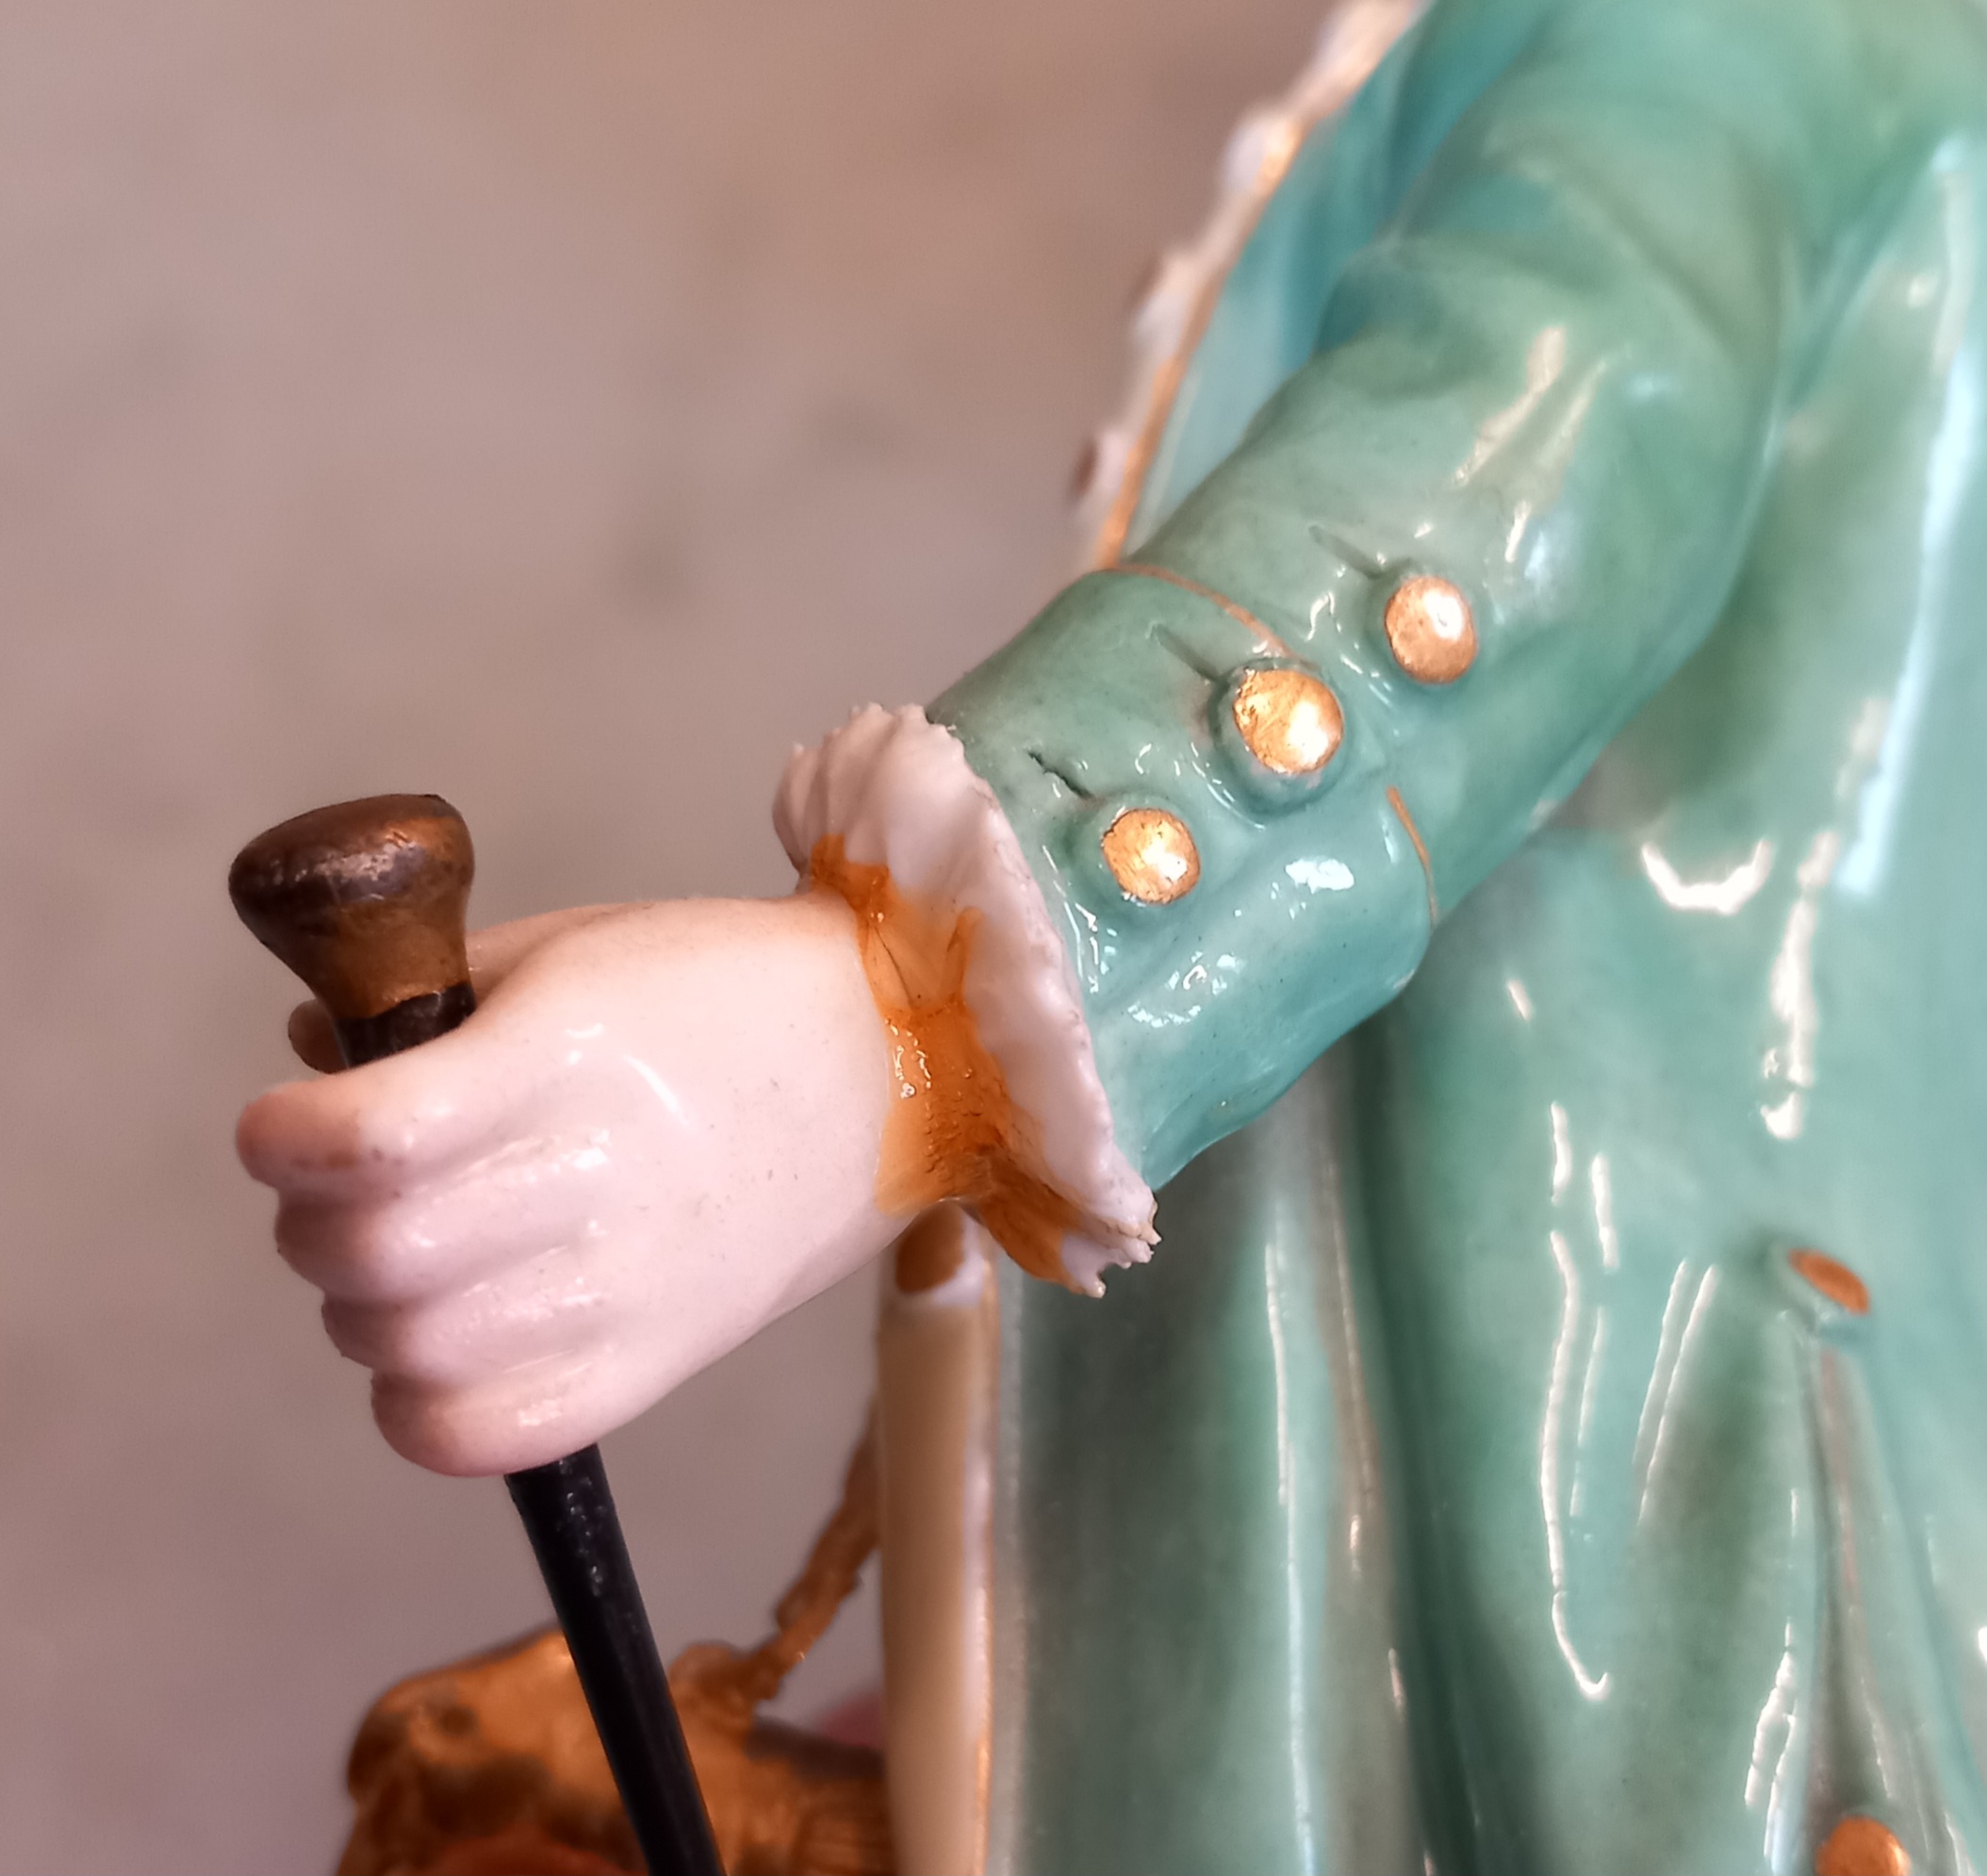 A Meissen figure, 19th century, of a gentleman with tri-corn hat, turquoise overcoat and breeches - Image 6 of 10